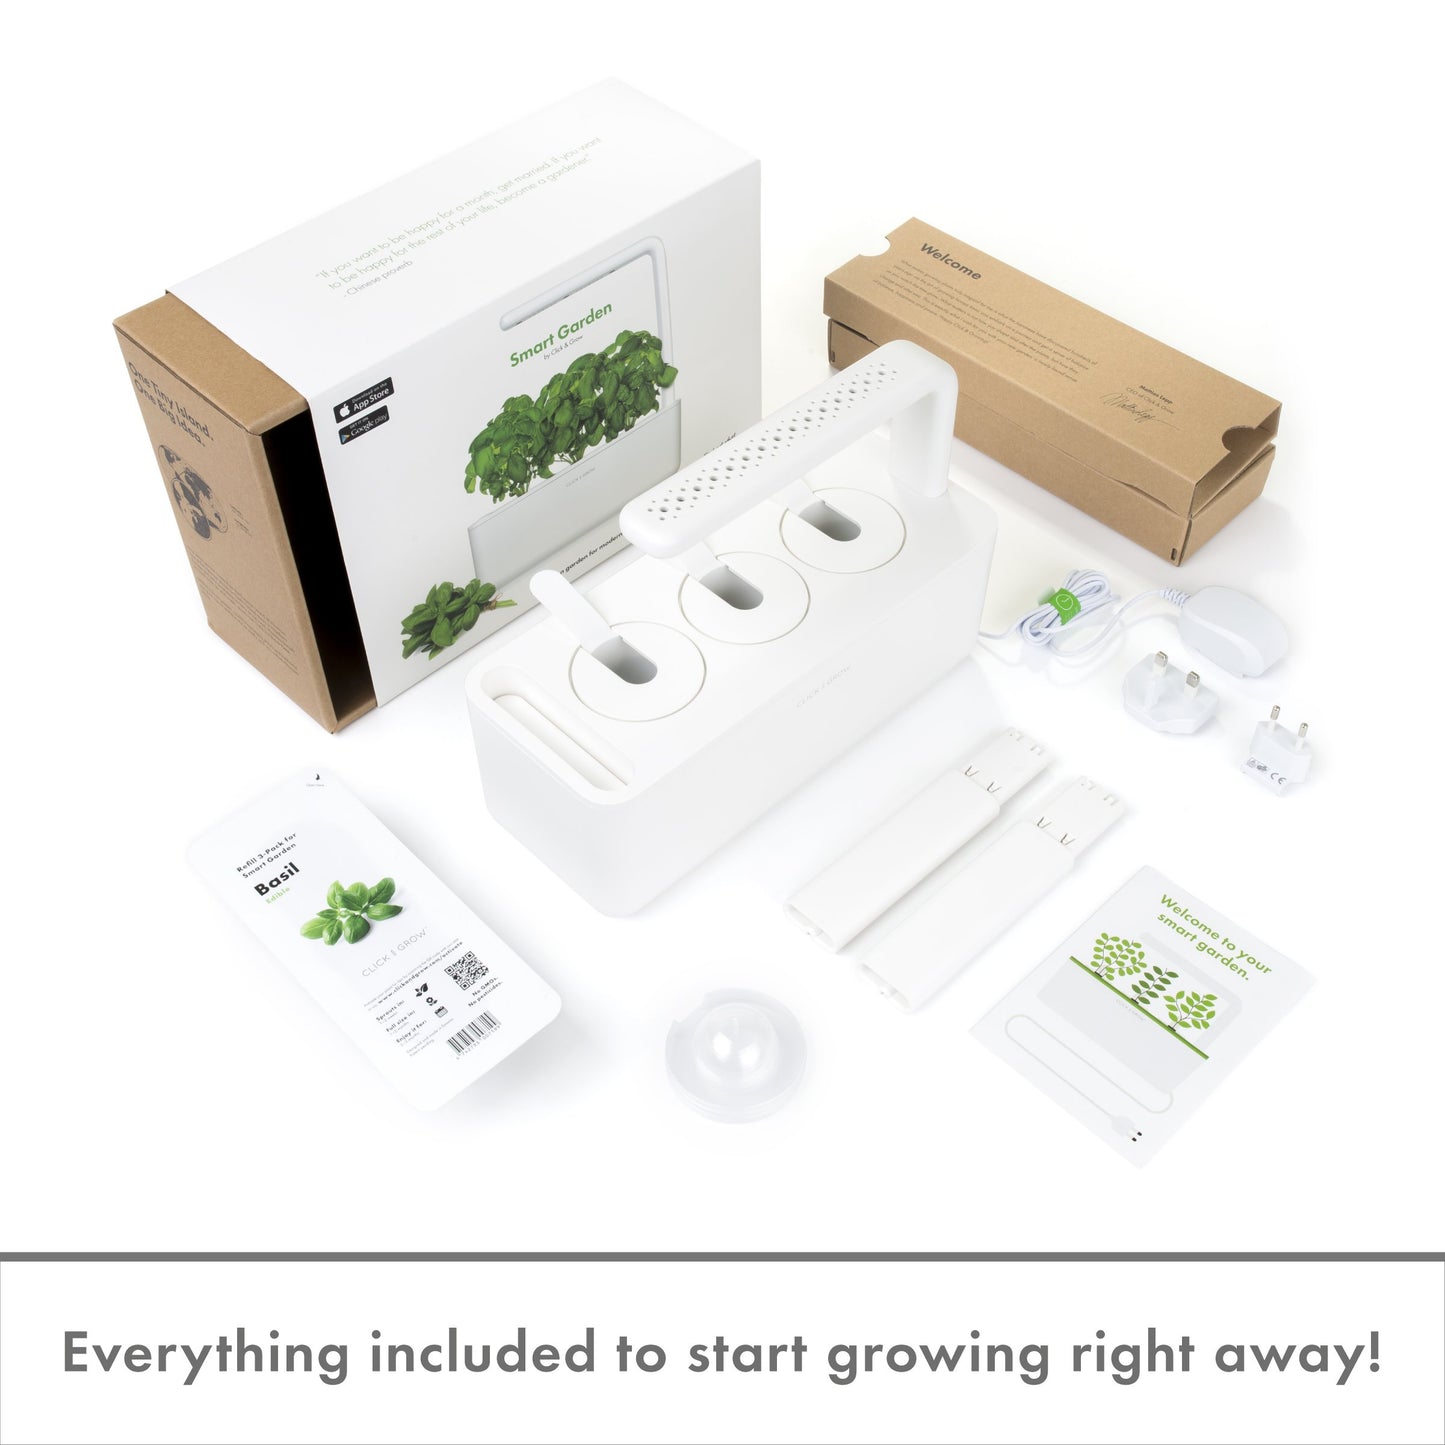 Click & Grow Indoor Herb Garden Kit with Grow Light | Smart Garden for Home Kitchen Windowsill | Easier than Hydroponics Growing System | Vegetable Gardening Starter (3 Basil Pods included), Grey